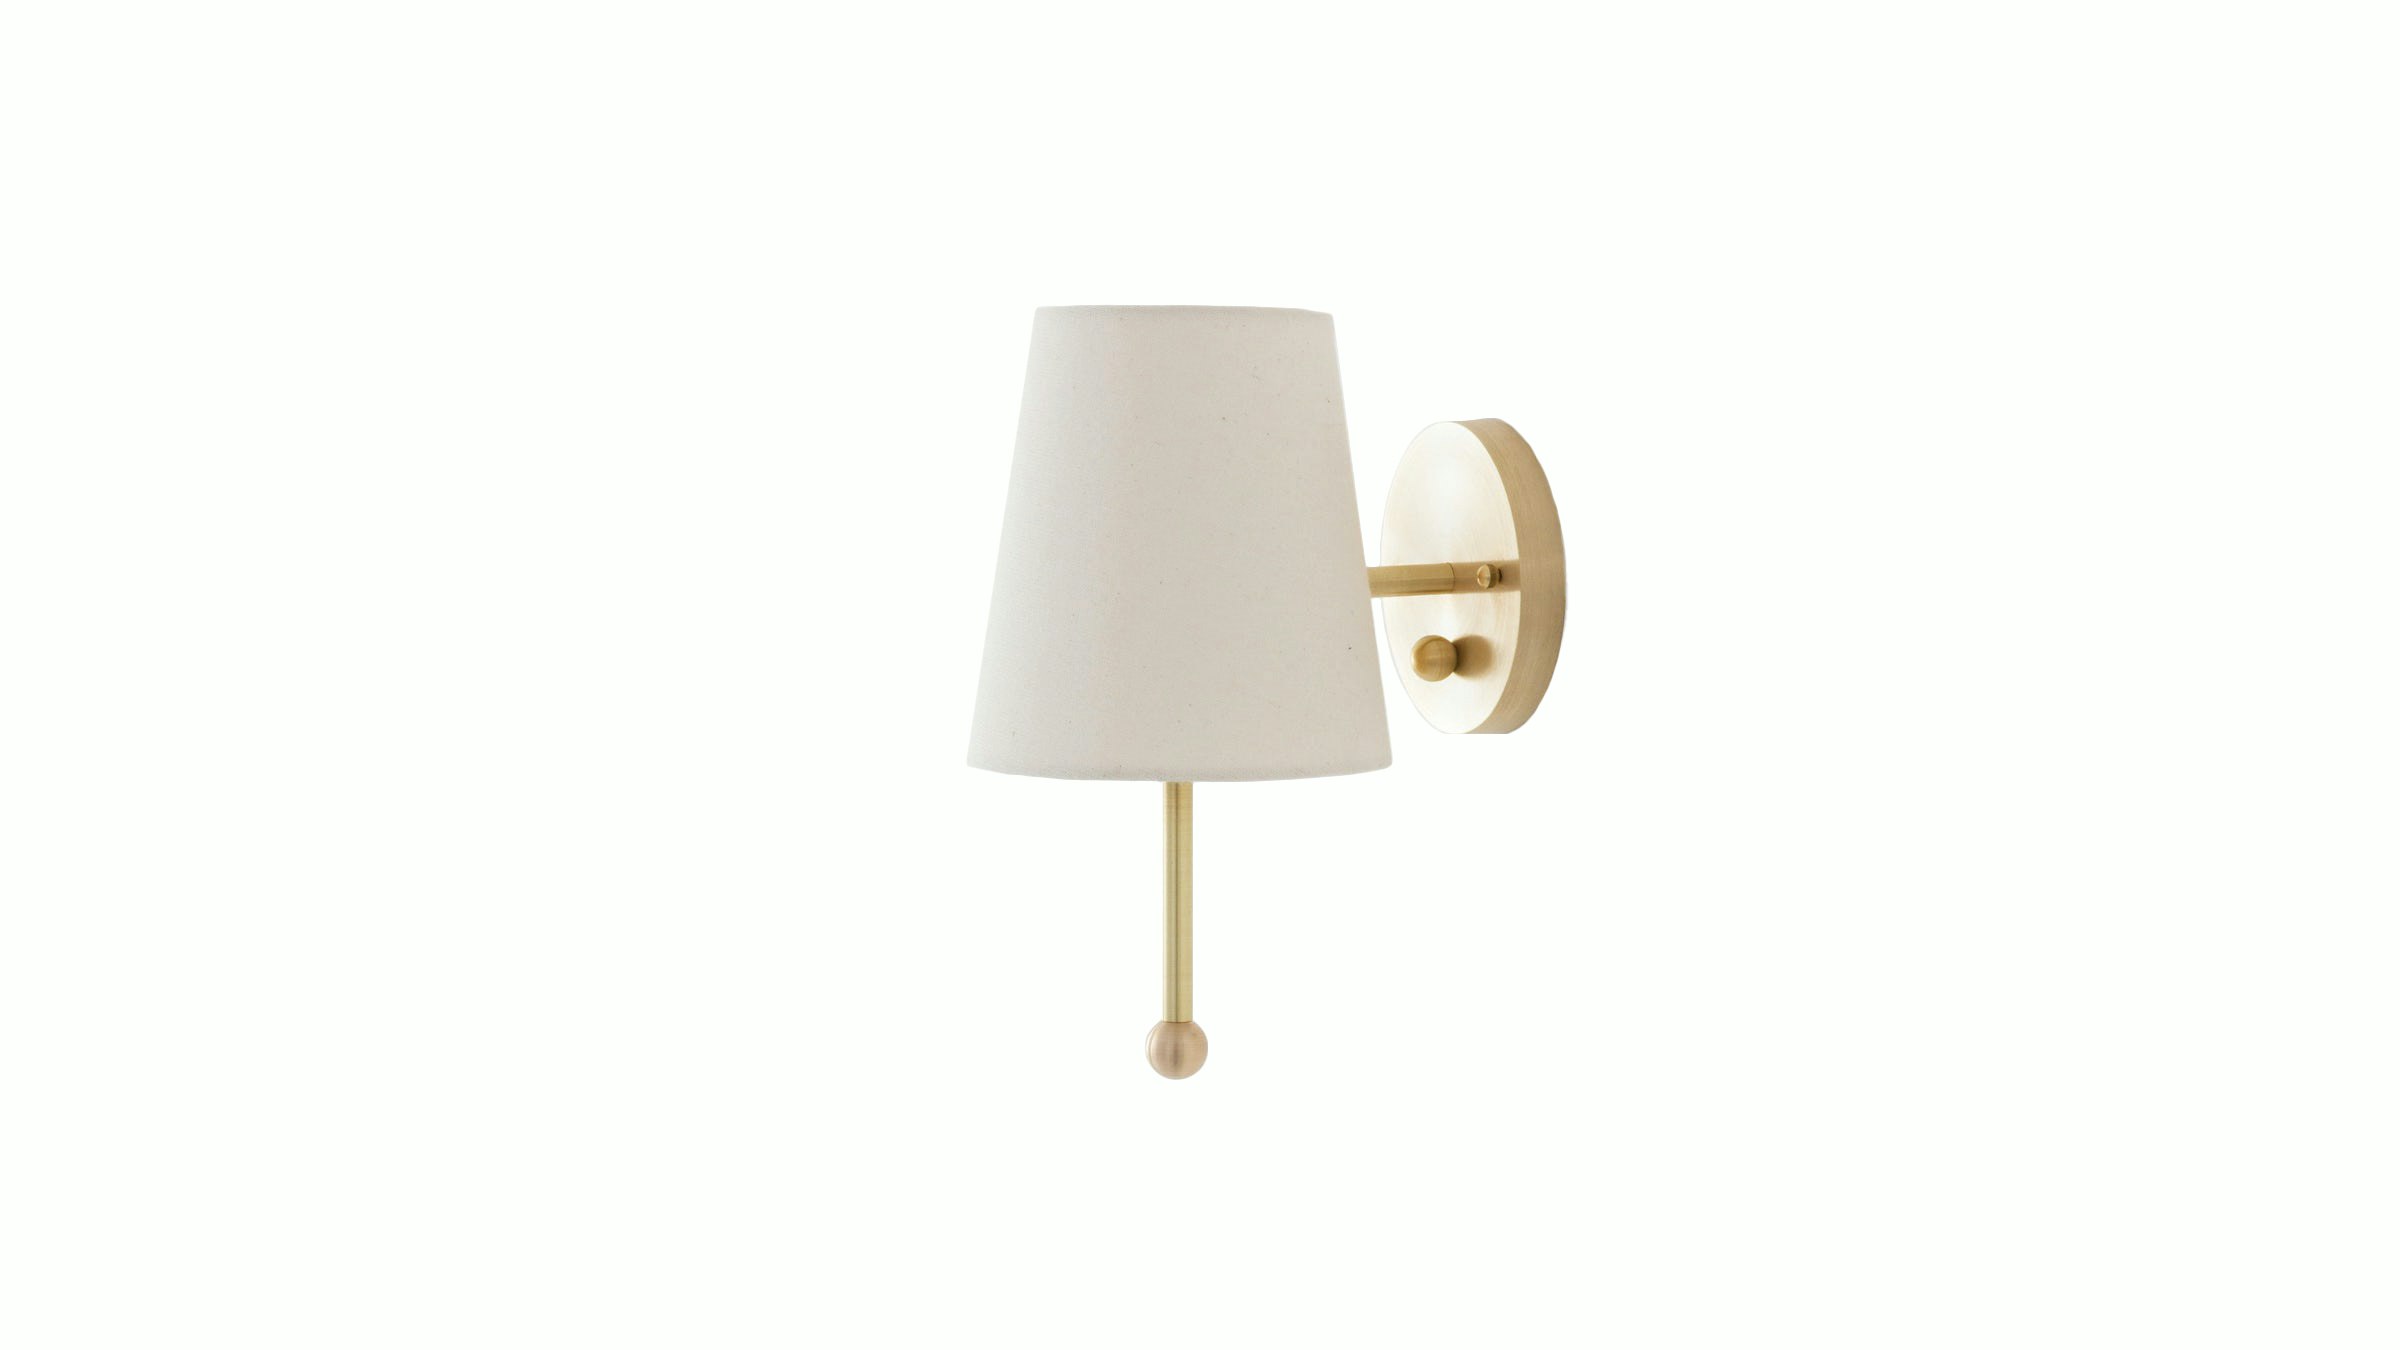 Wall Lamp Lamps Renata World Wall Lamp Concrete Living Room Bedroom industry 